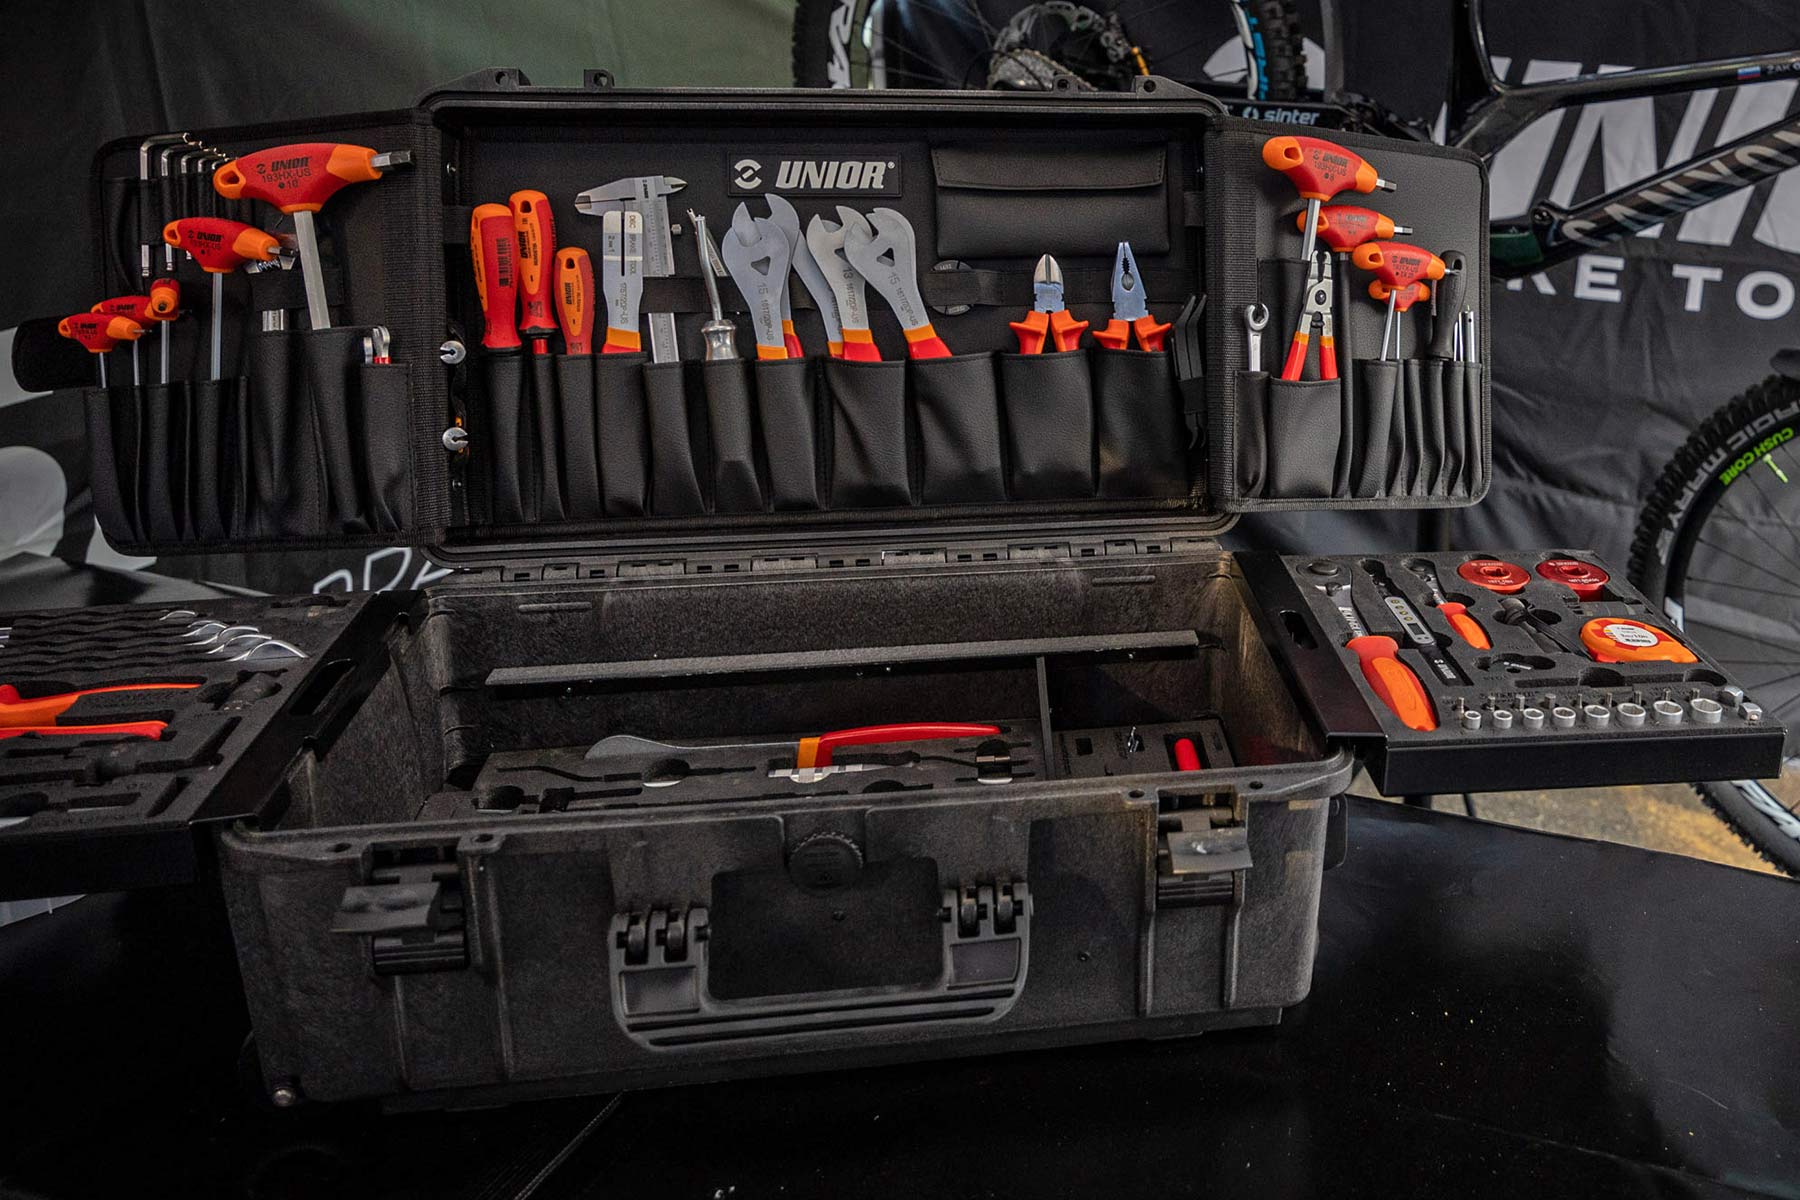 Unior bike tools Master Kit for pro cycling mechanics, contents